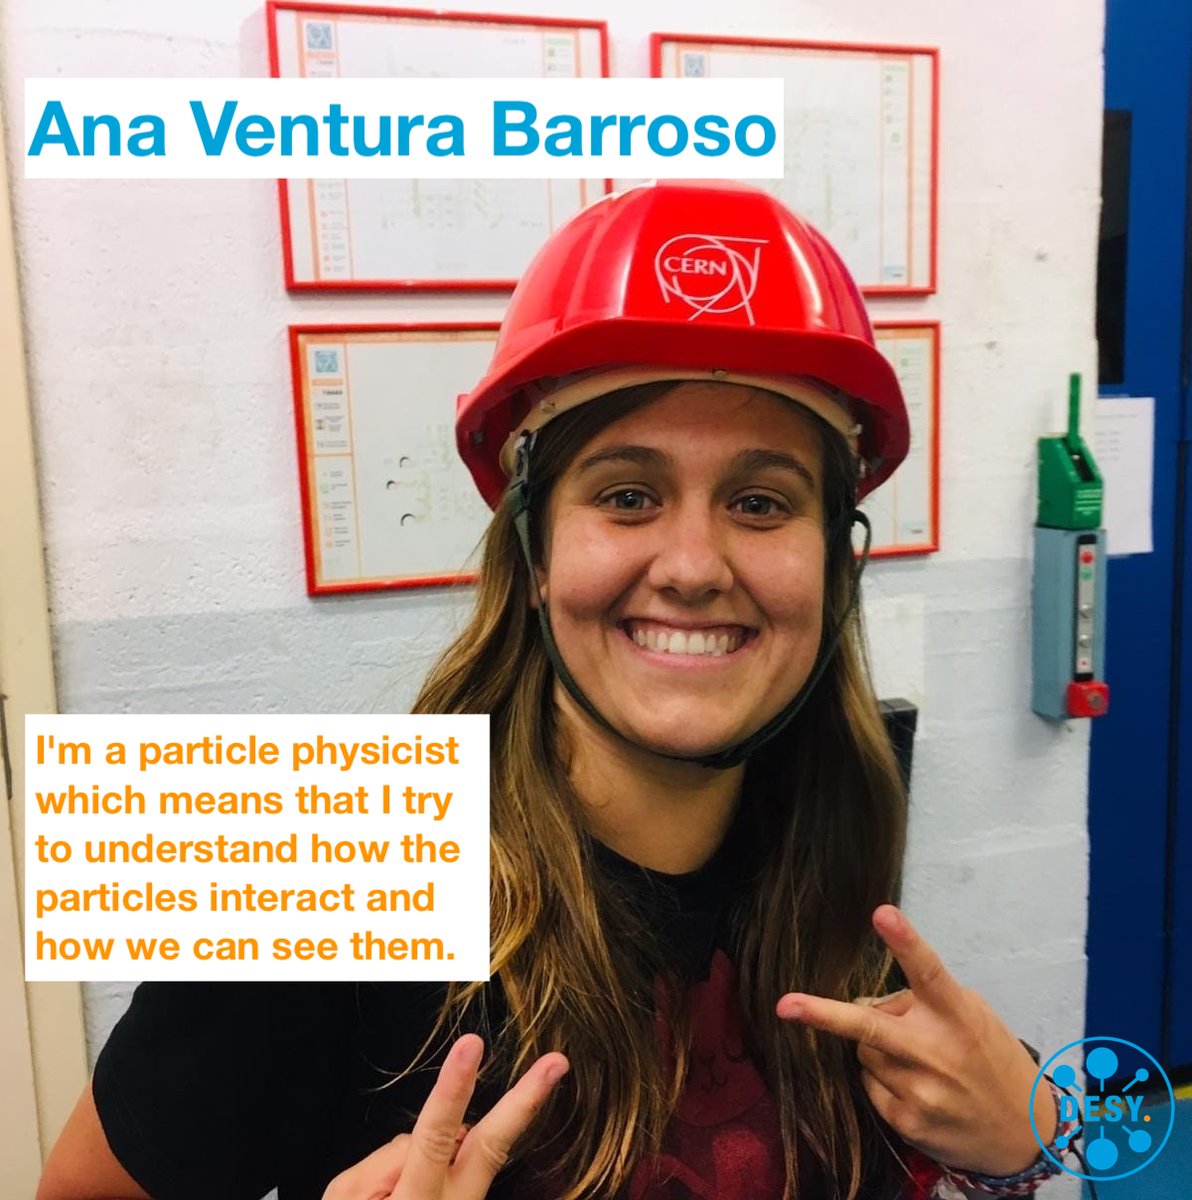 Ana Ventura Barroso is a PhD student for the  @CMSExperiment at  @CERN and at  @DESY. "For me physics is fascinating because by studying it I can understand how the universe works.”  #WomenInScience  @particlenews